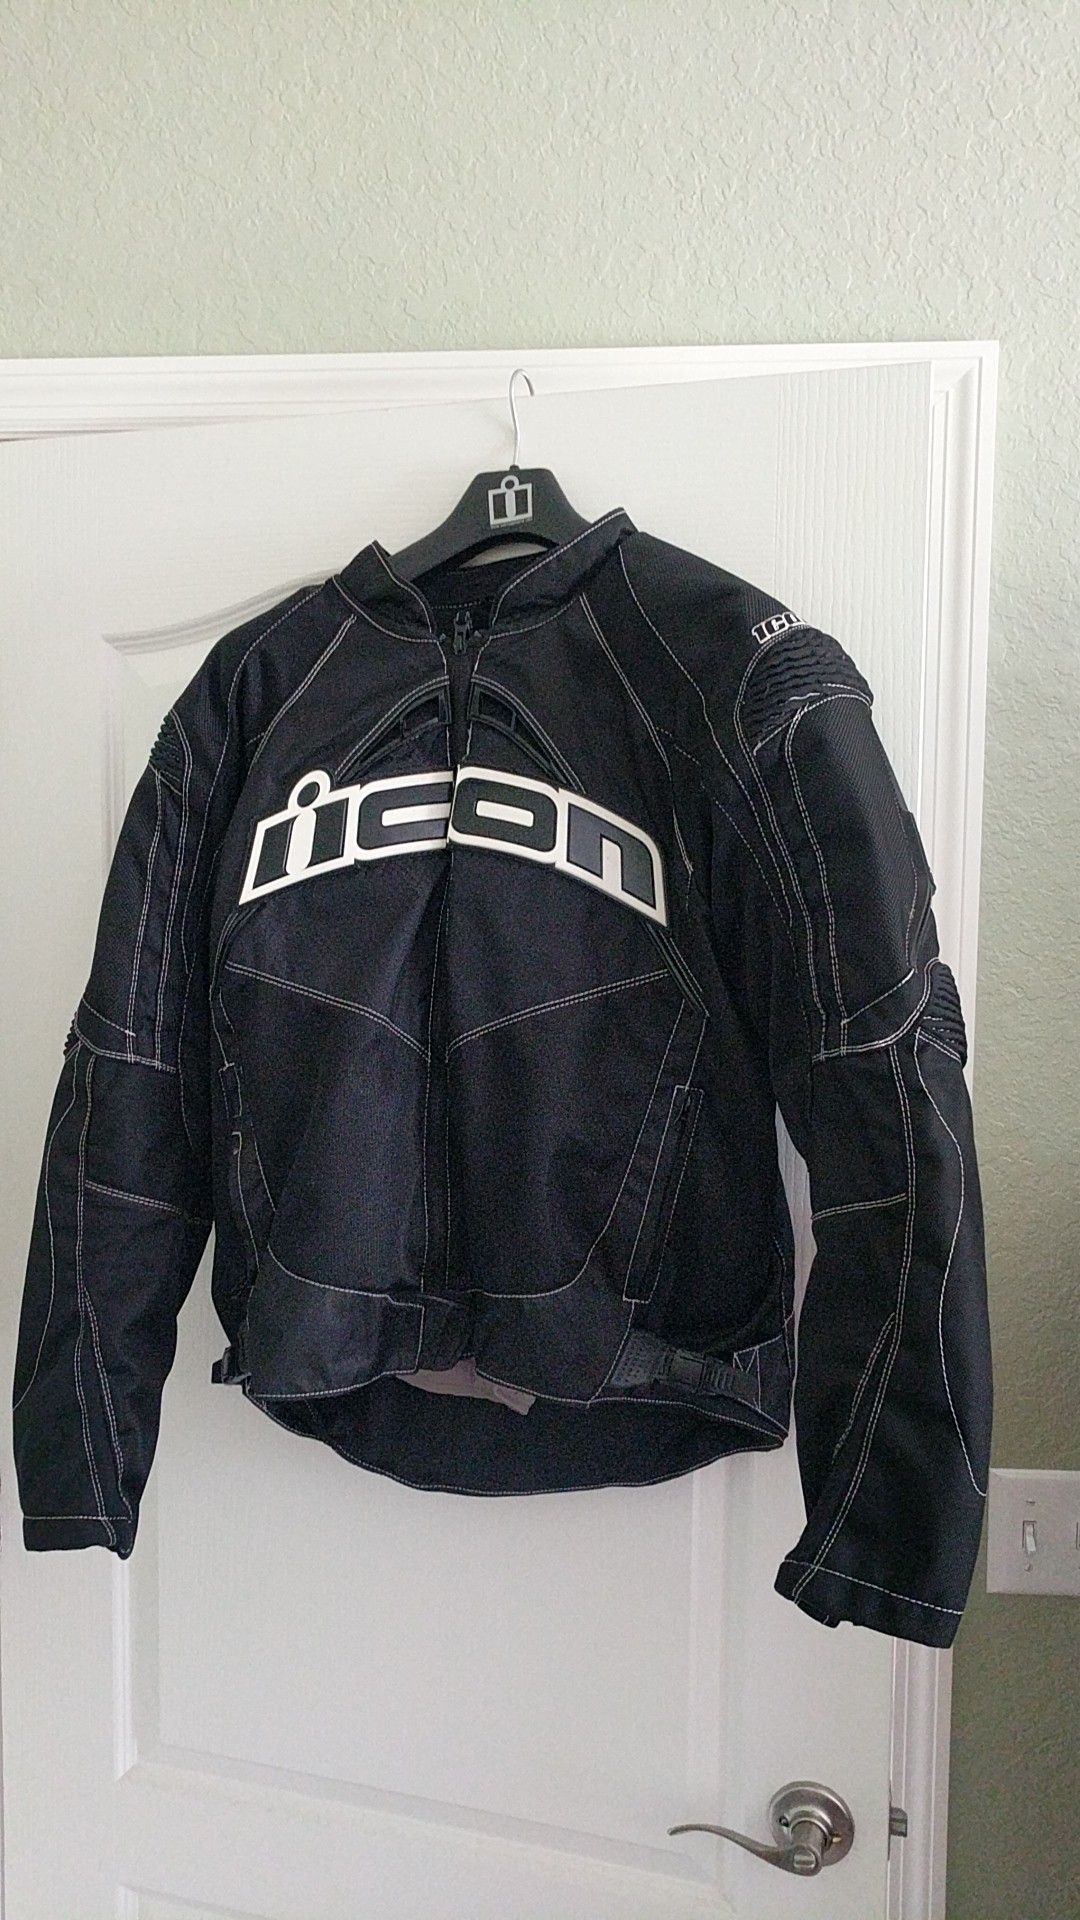 Men's icon motorcycle jacket and gloves